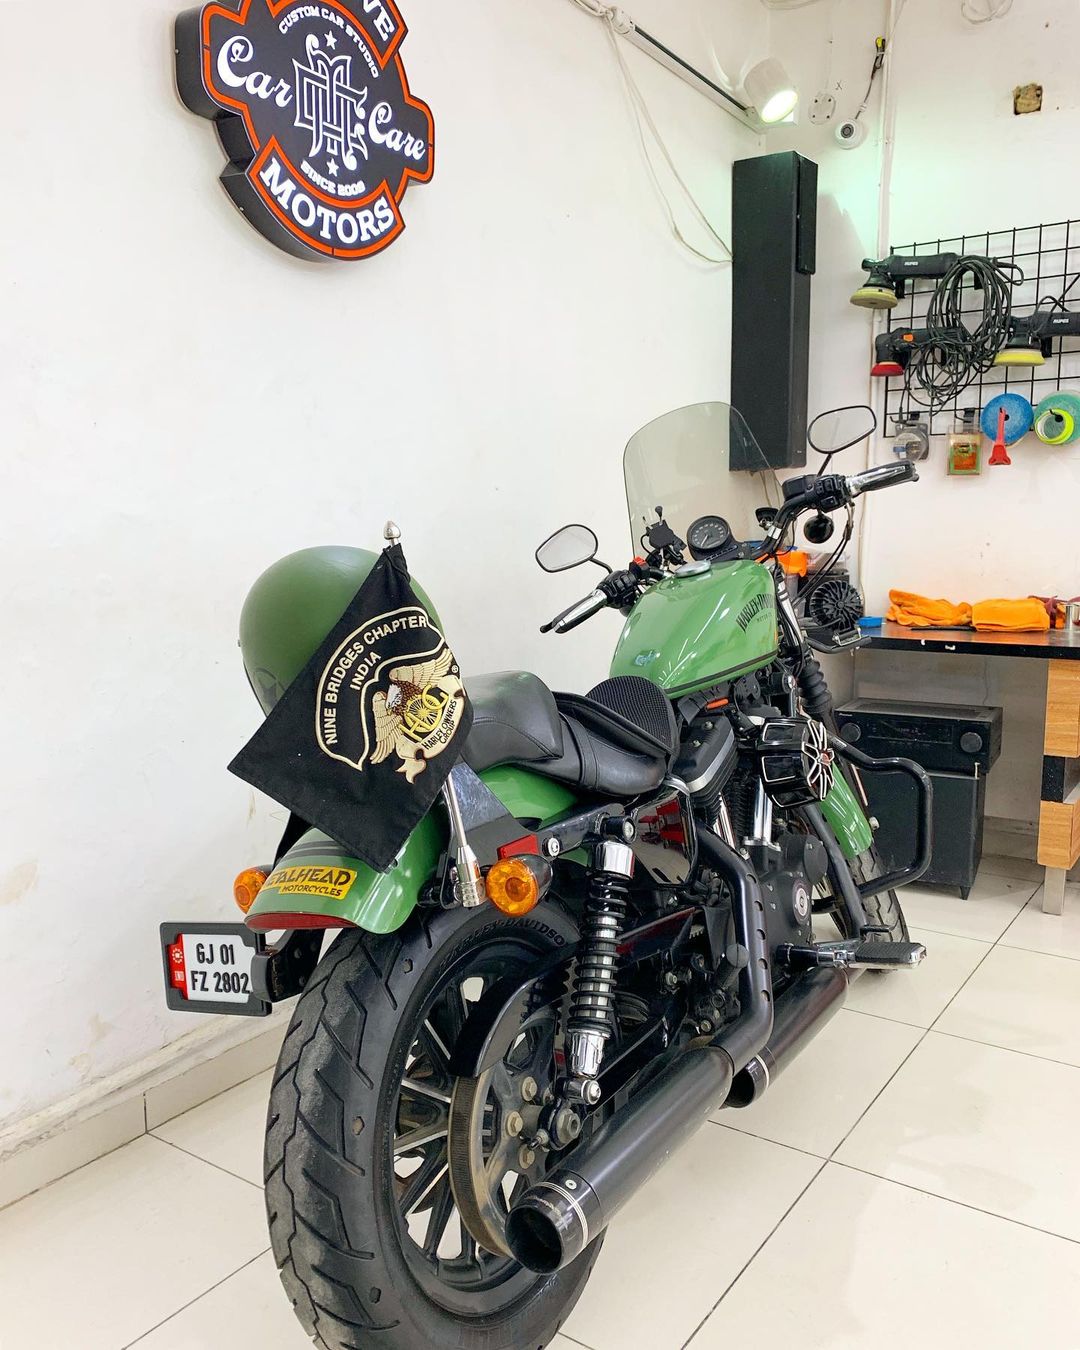 Ceramic Coating on Customised Harley Iron 883 
Get your Rides Ceramic Coating at Reasonable Rates

Inquire Now 👉🏻 9909999135

#solorider #happyclient #creativemotors